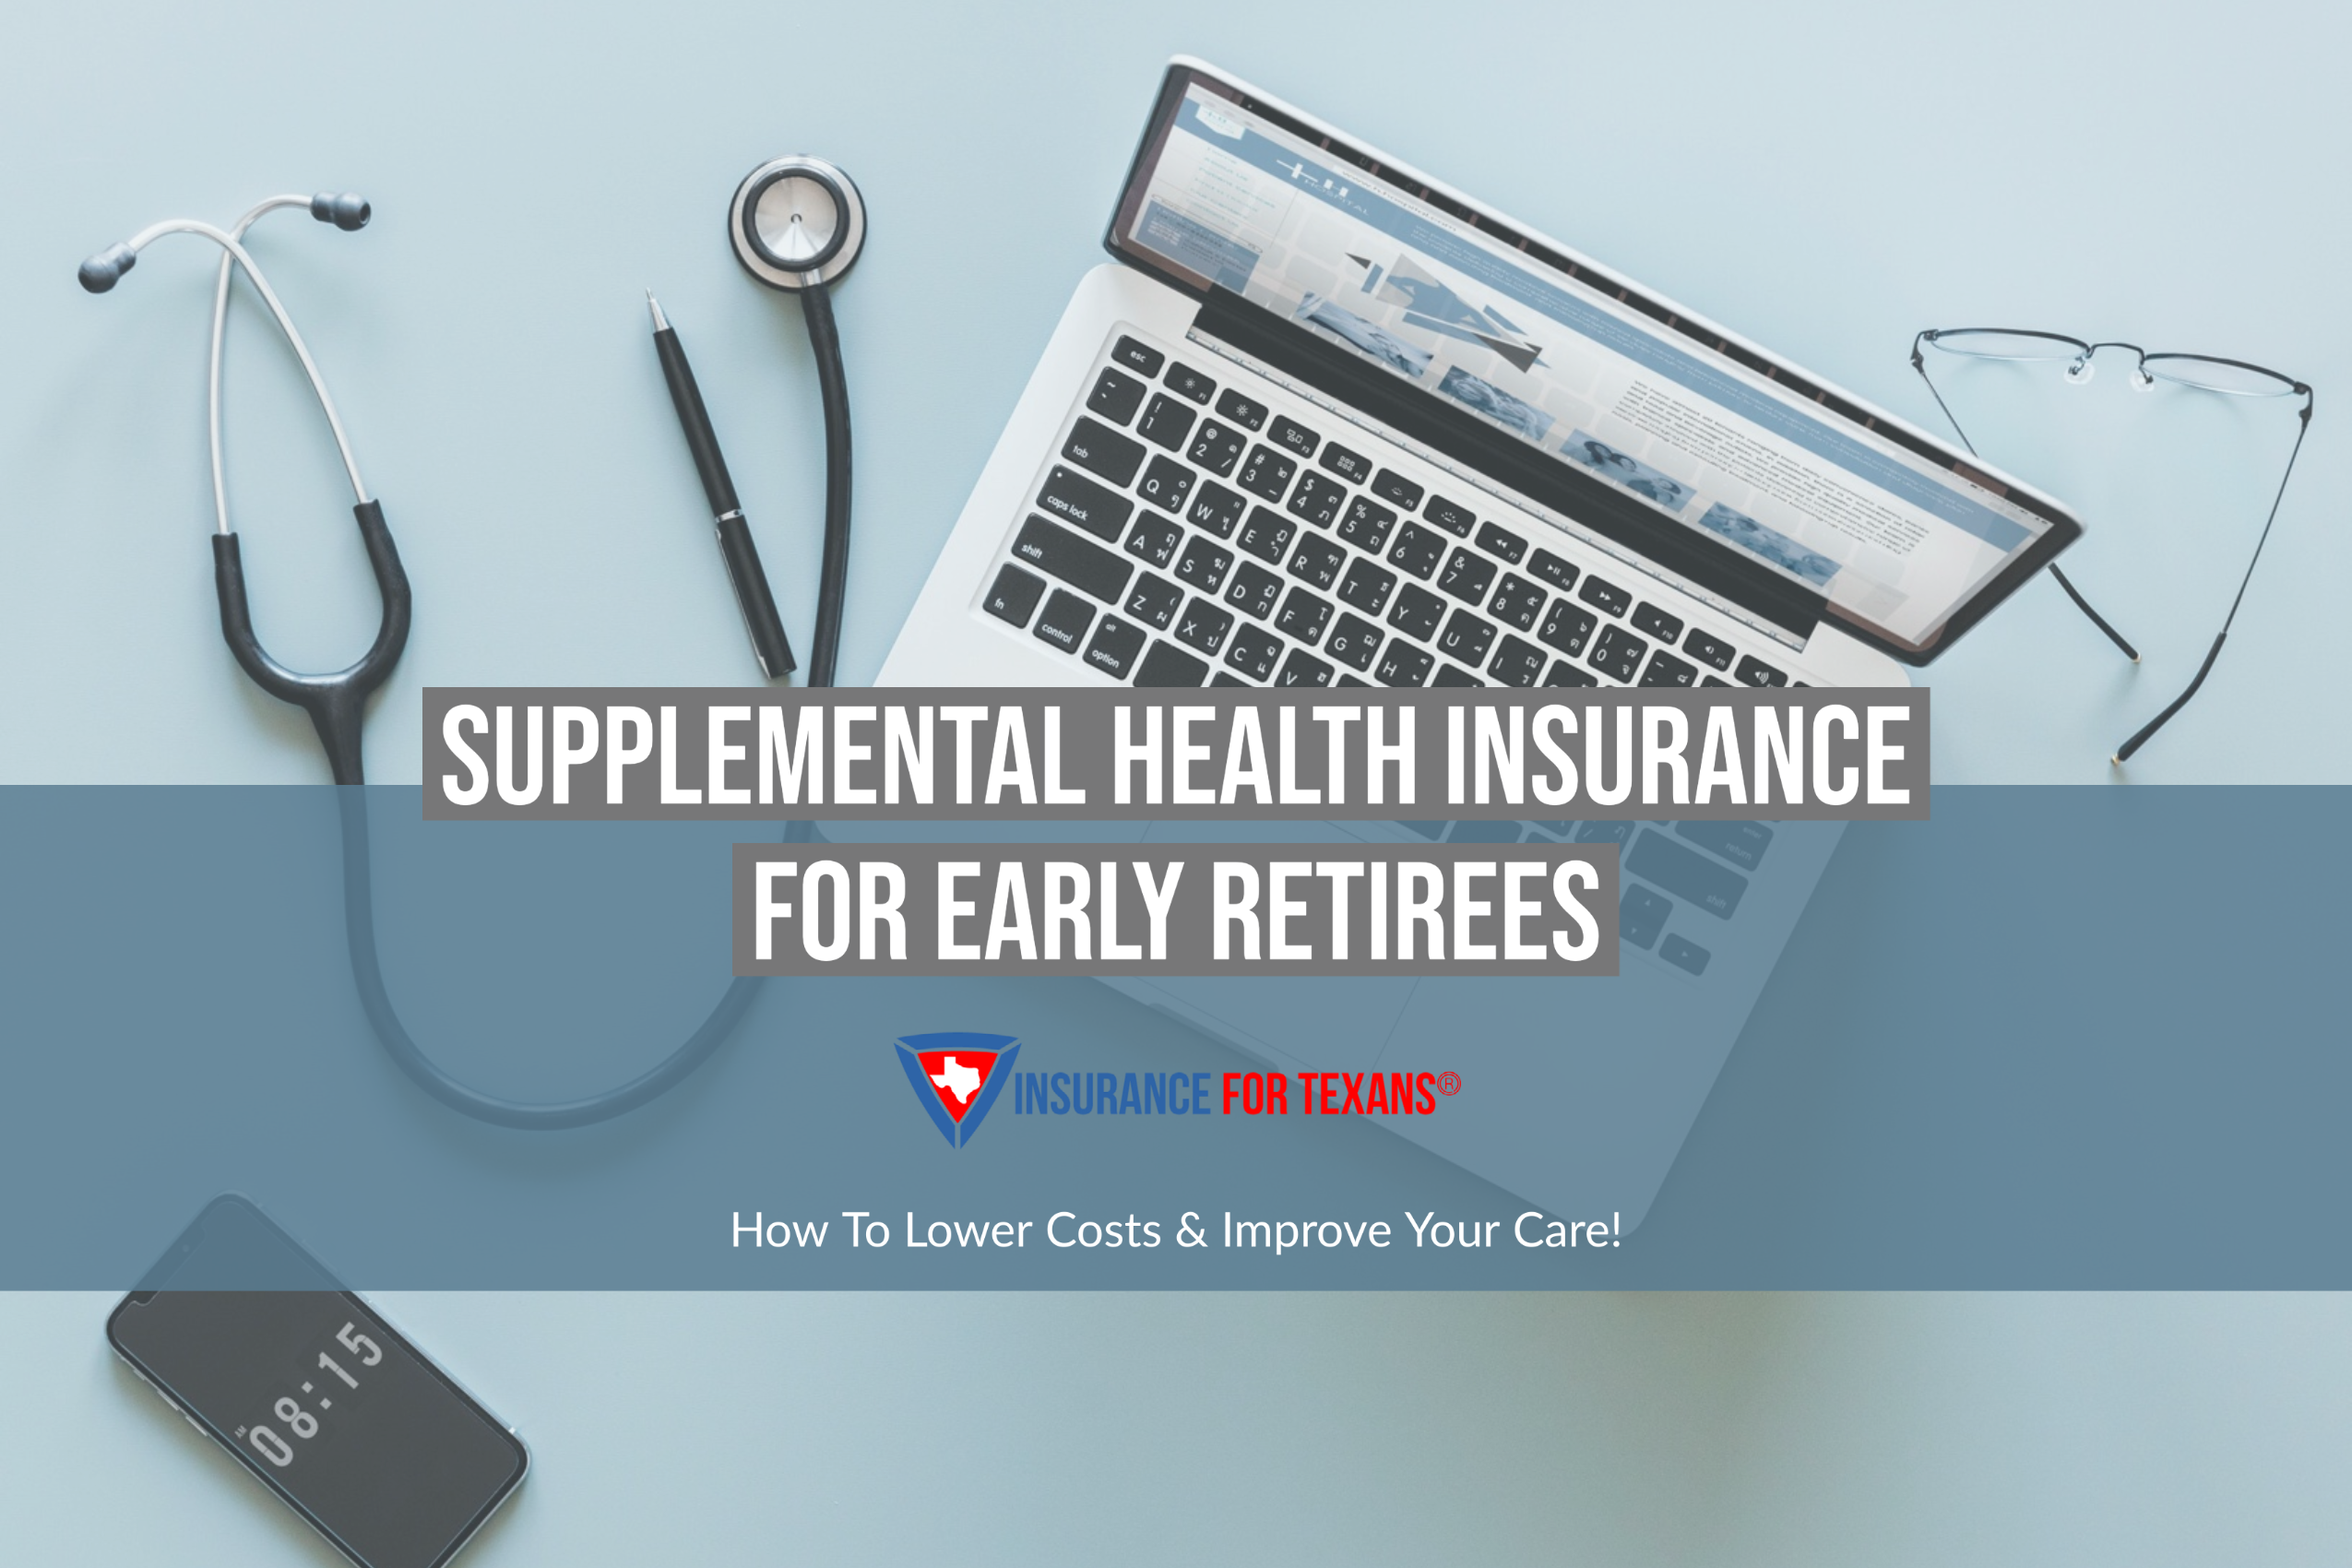 Early Retirees Need Supplemental Health Insurance To Lower Total Cost Of Care